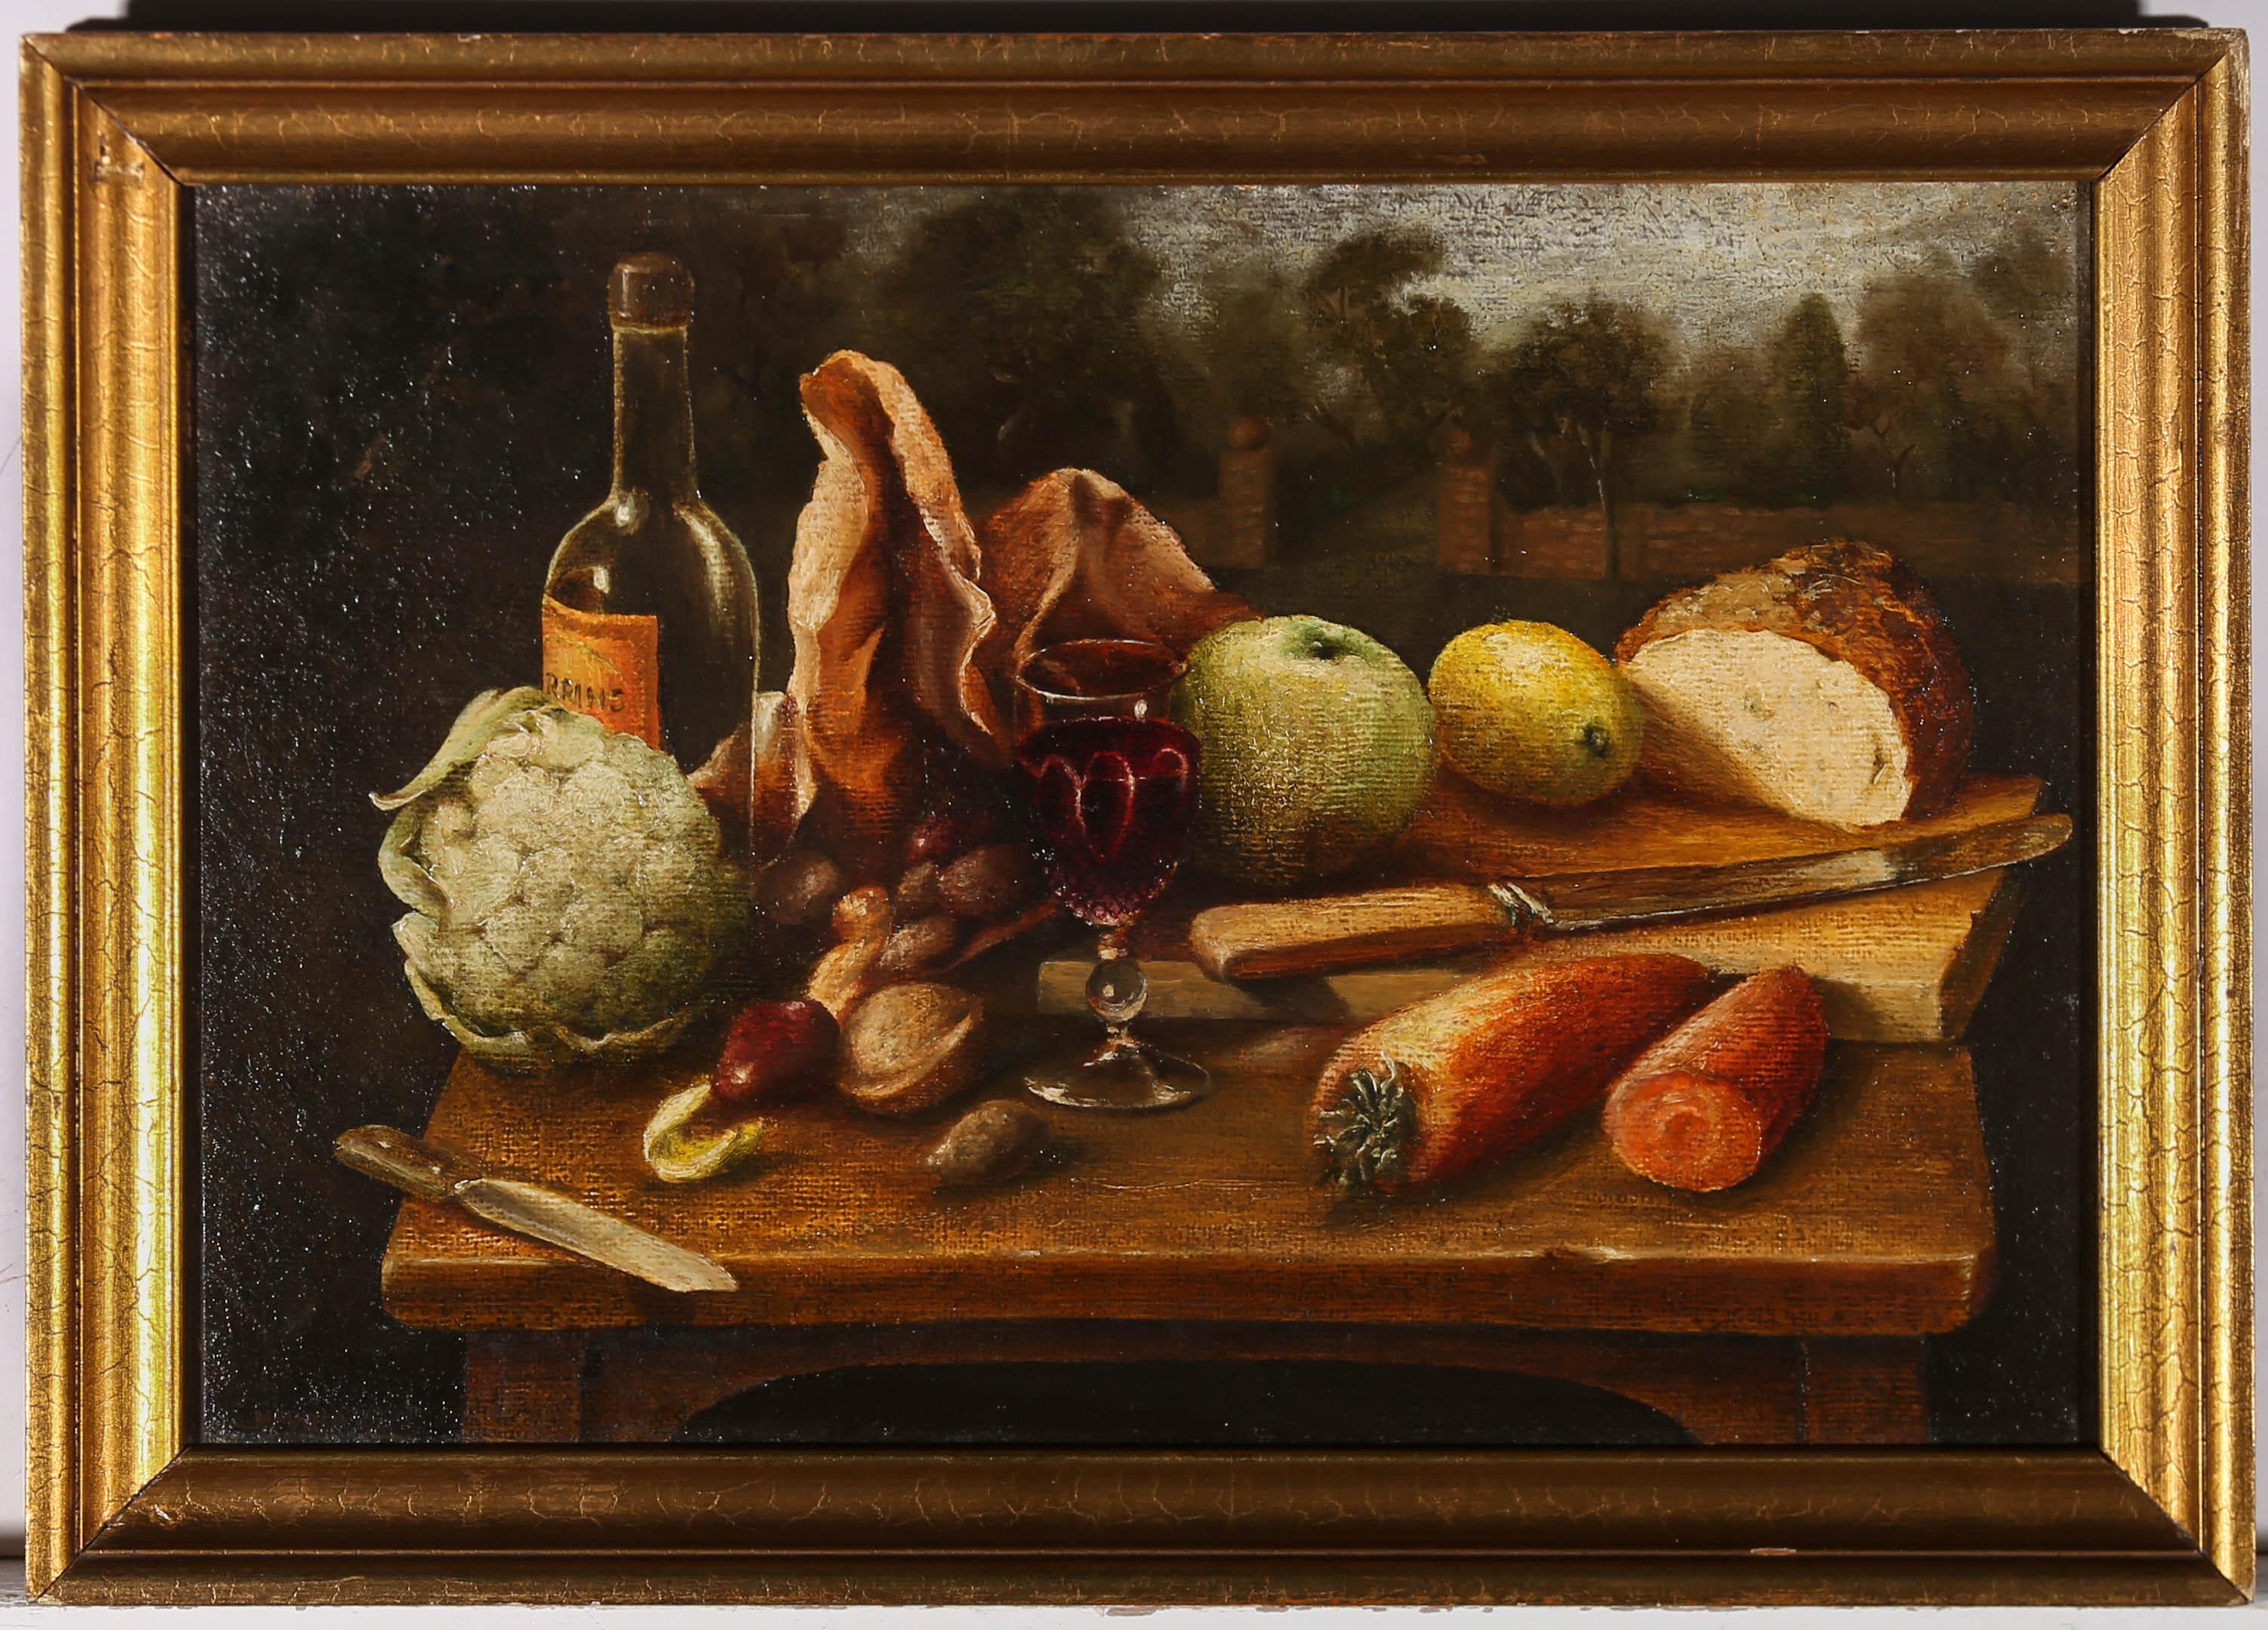 A delightful oil still life of various produce set on a wooden table with a glass of wine. We can see the still life has been set outside amongst the greenery and garden wall behind it. Signed and dated to the lower left and well presented in a gilt